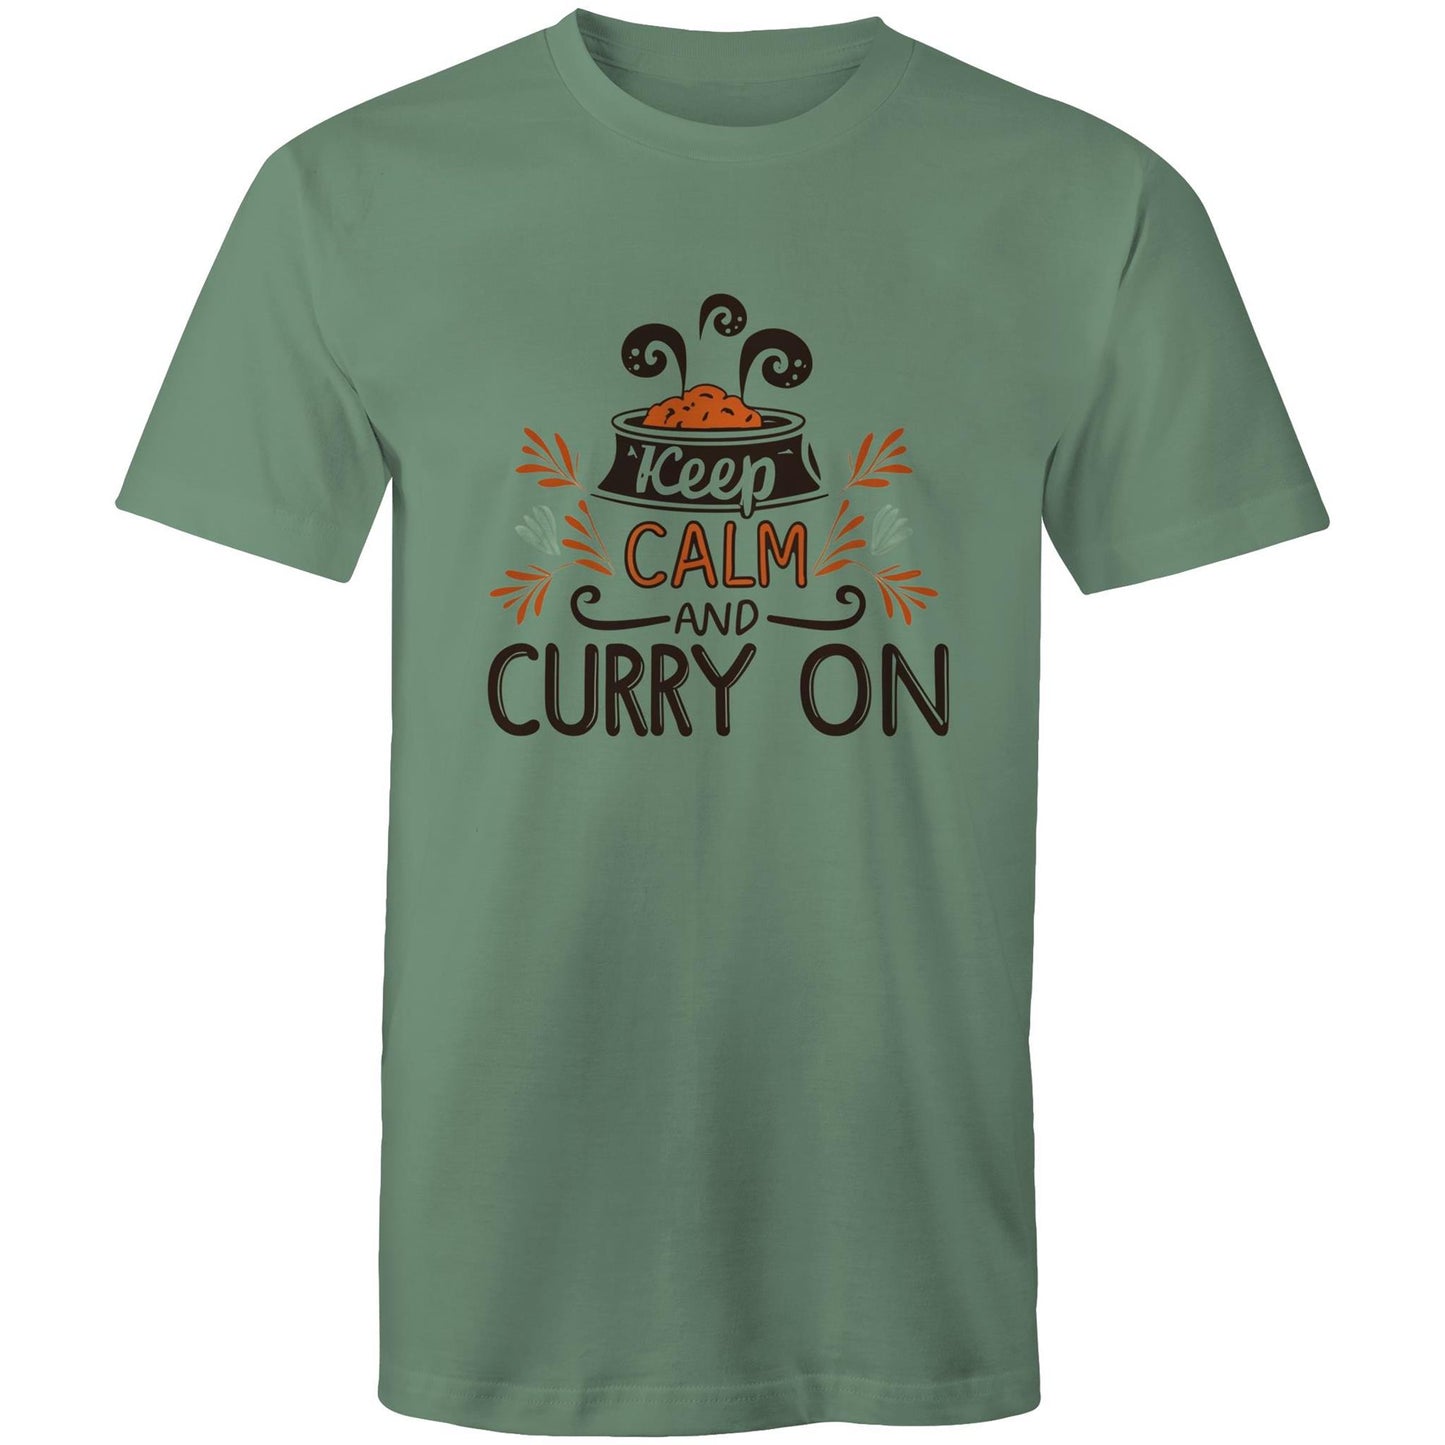 Keep Calm and Curry On - Mens T-Shirt